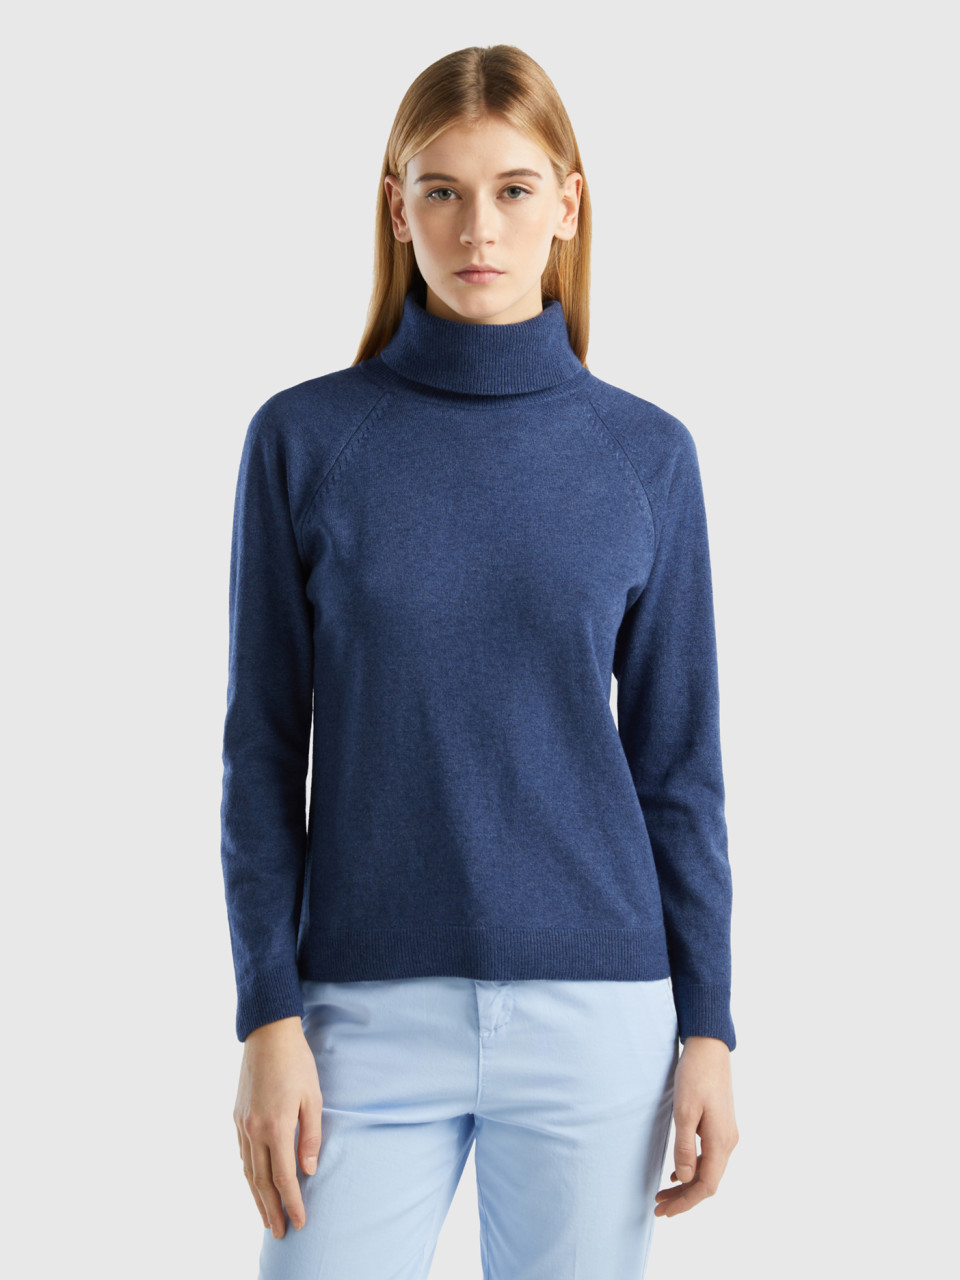 Benetton, Air Force Blue Turtleneck Sweater In Cashmere And Wool Blend, Air Force Blue, Women